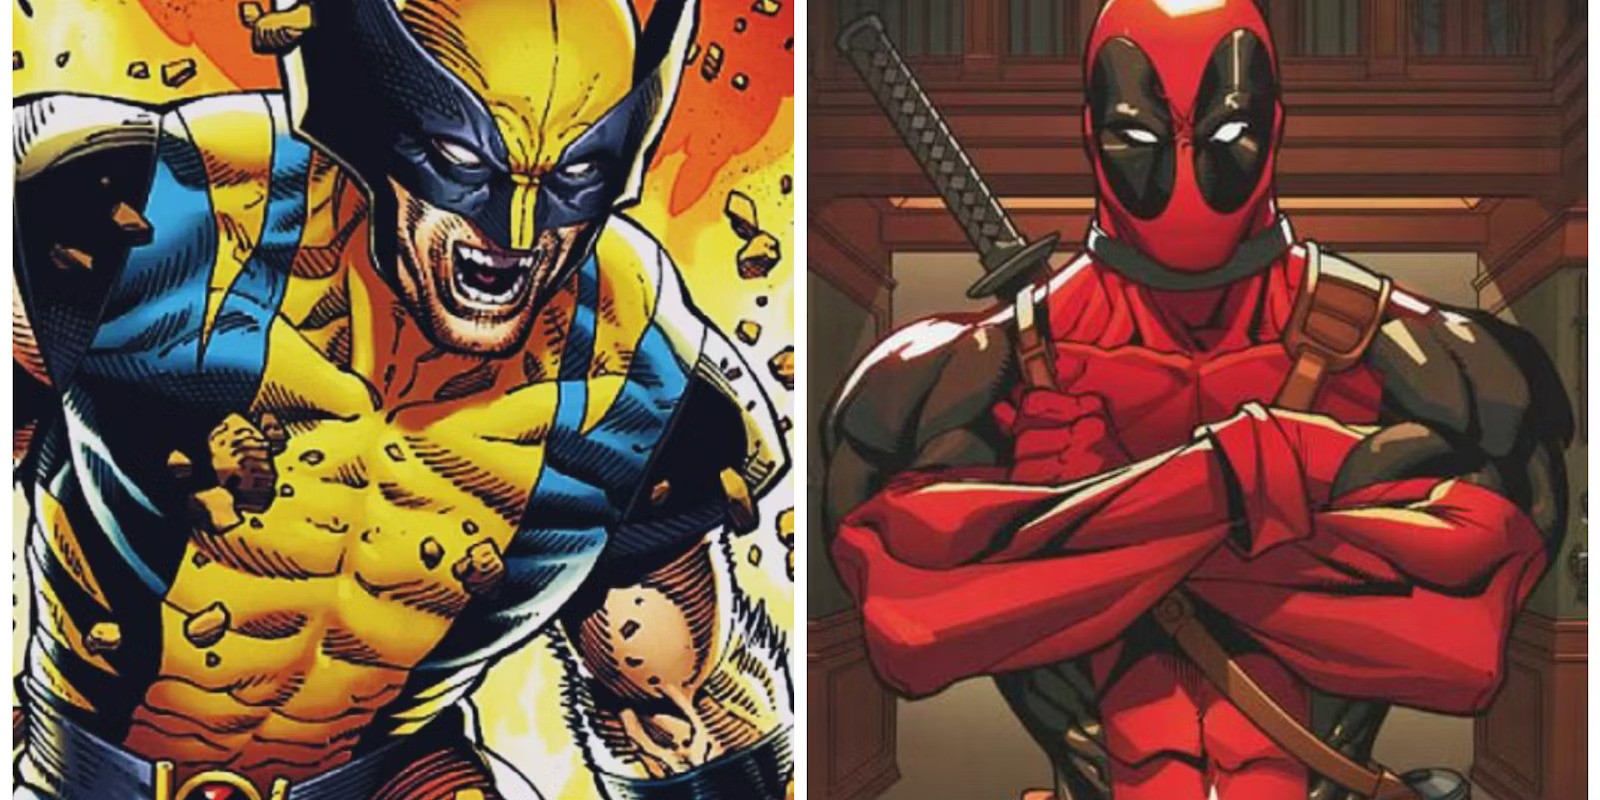 Wolverine and Deadpool as in the comics